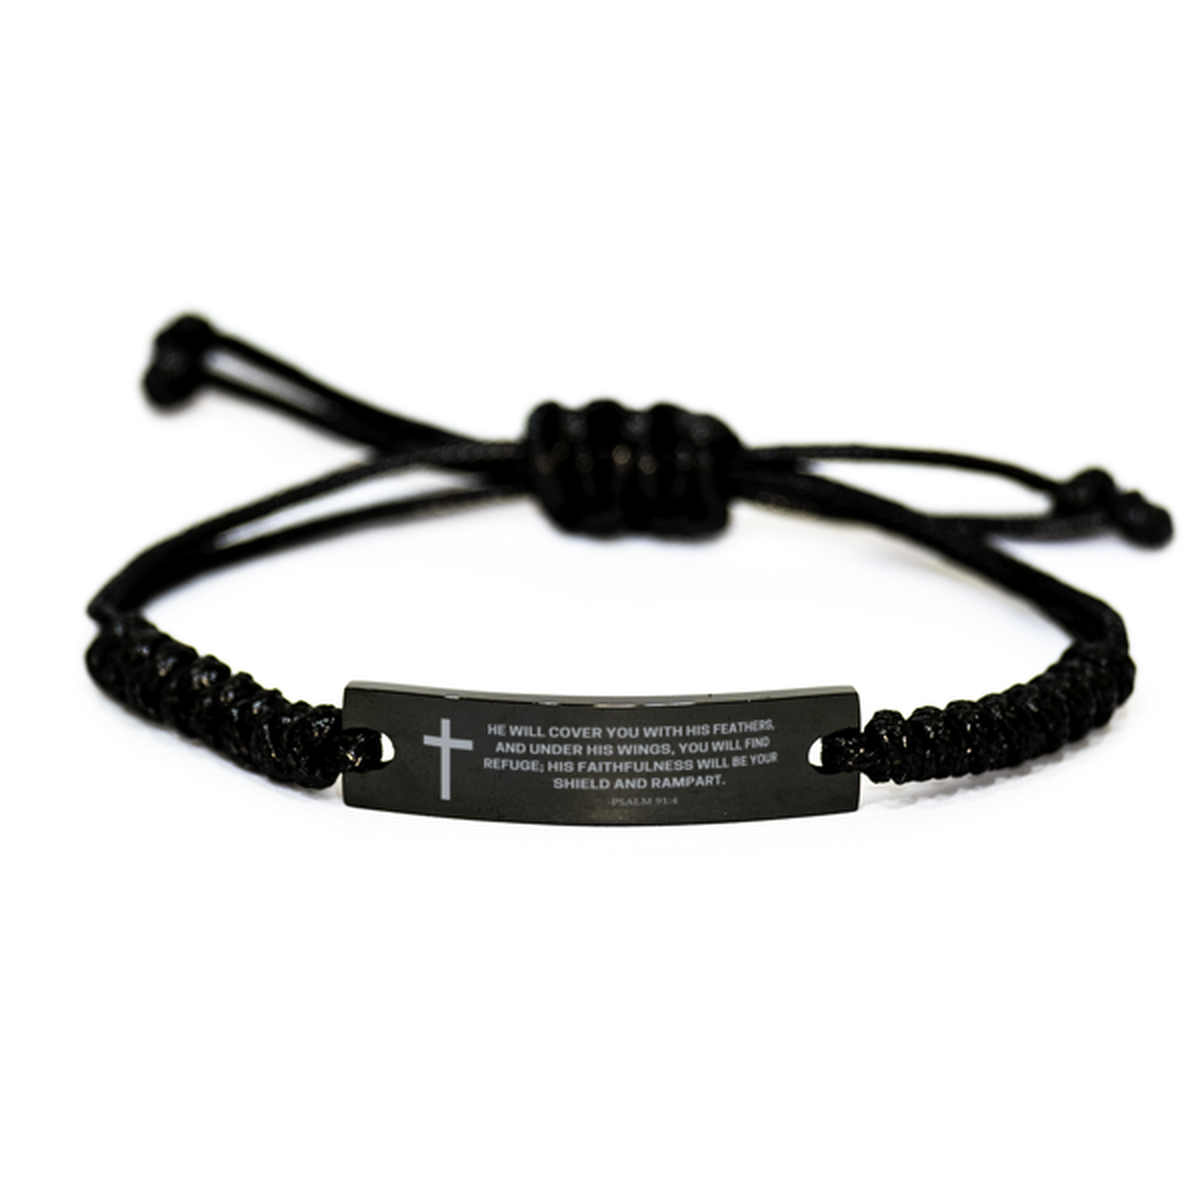 Baptism Gifts For Teenage Boys Girls, Christian Bible Verse Black Rope Bracelet, He will cover you with his feathers, Catholic Confirmation Gifts for Son, Godson, Grandson, Nephew